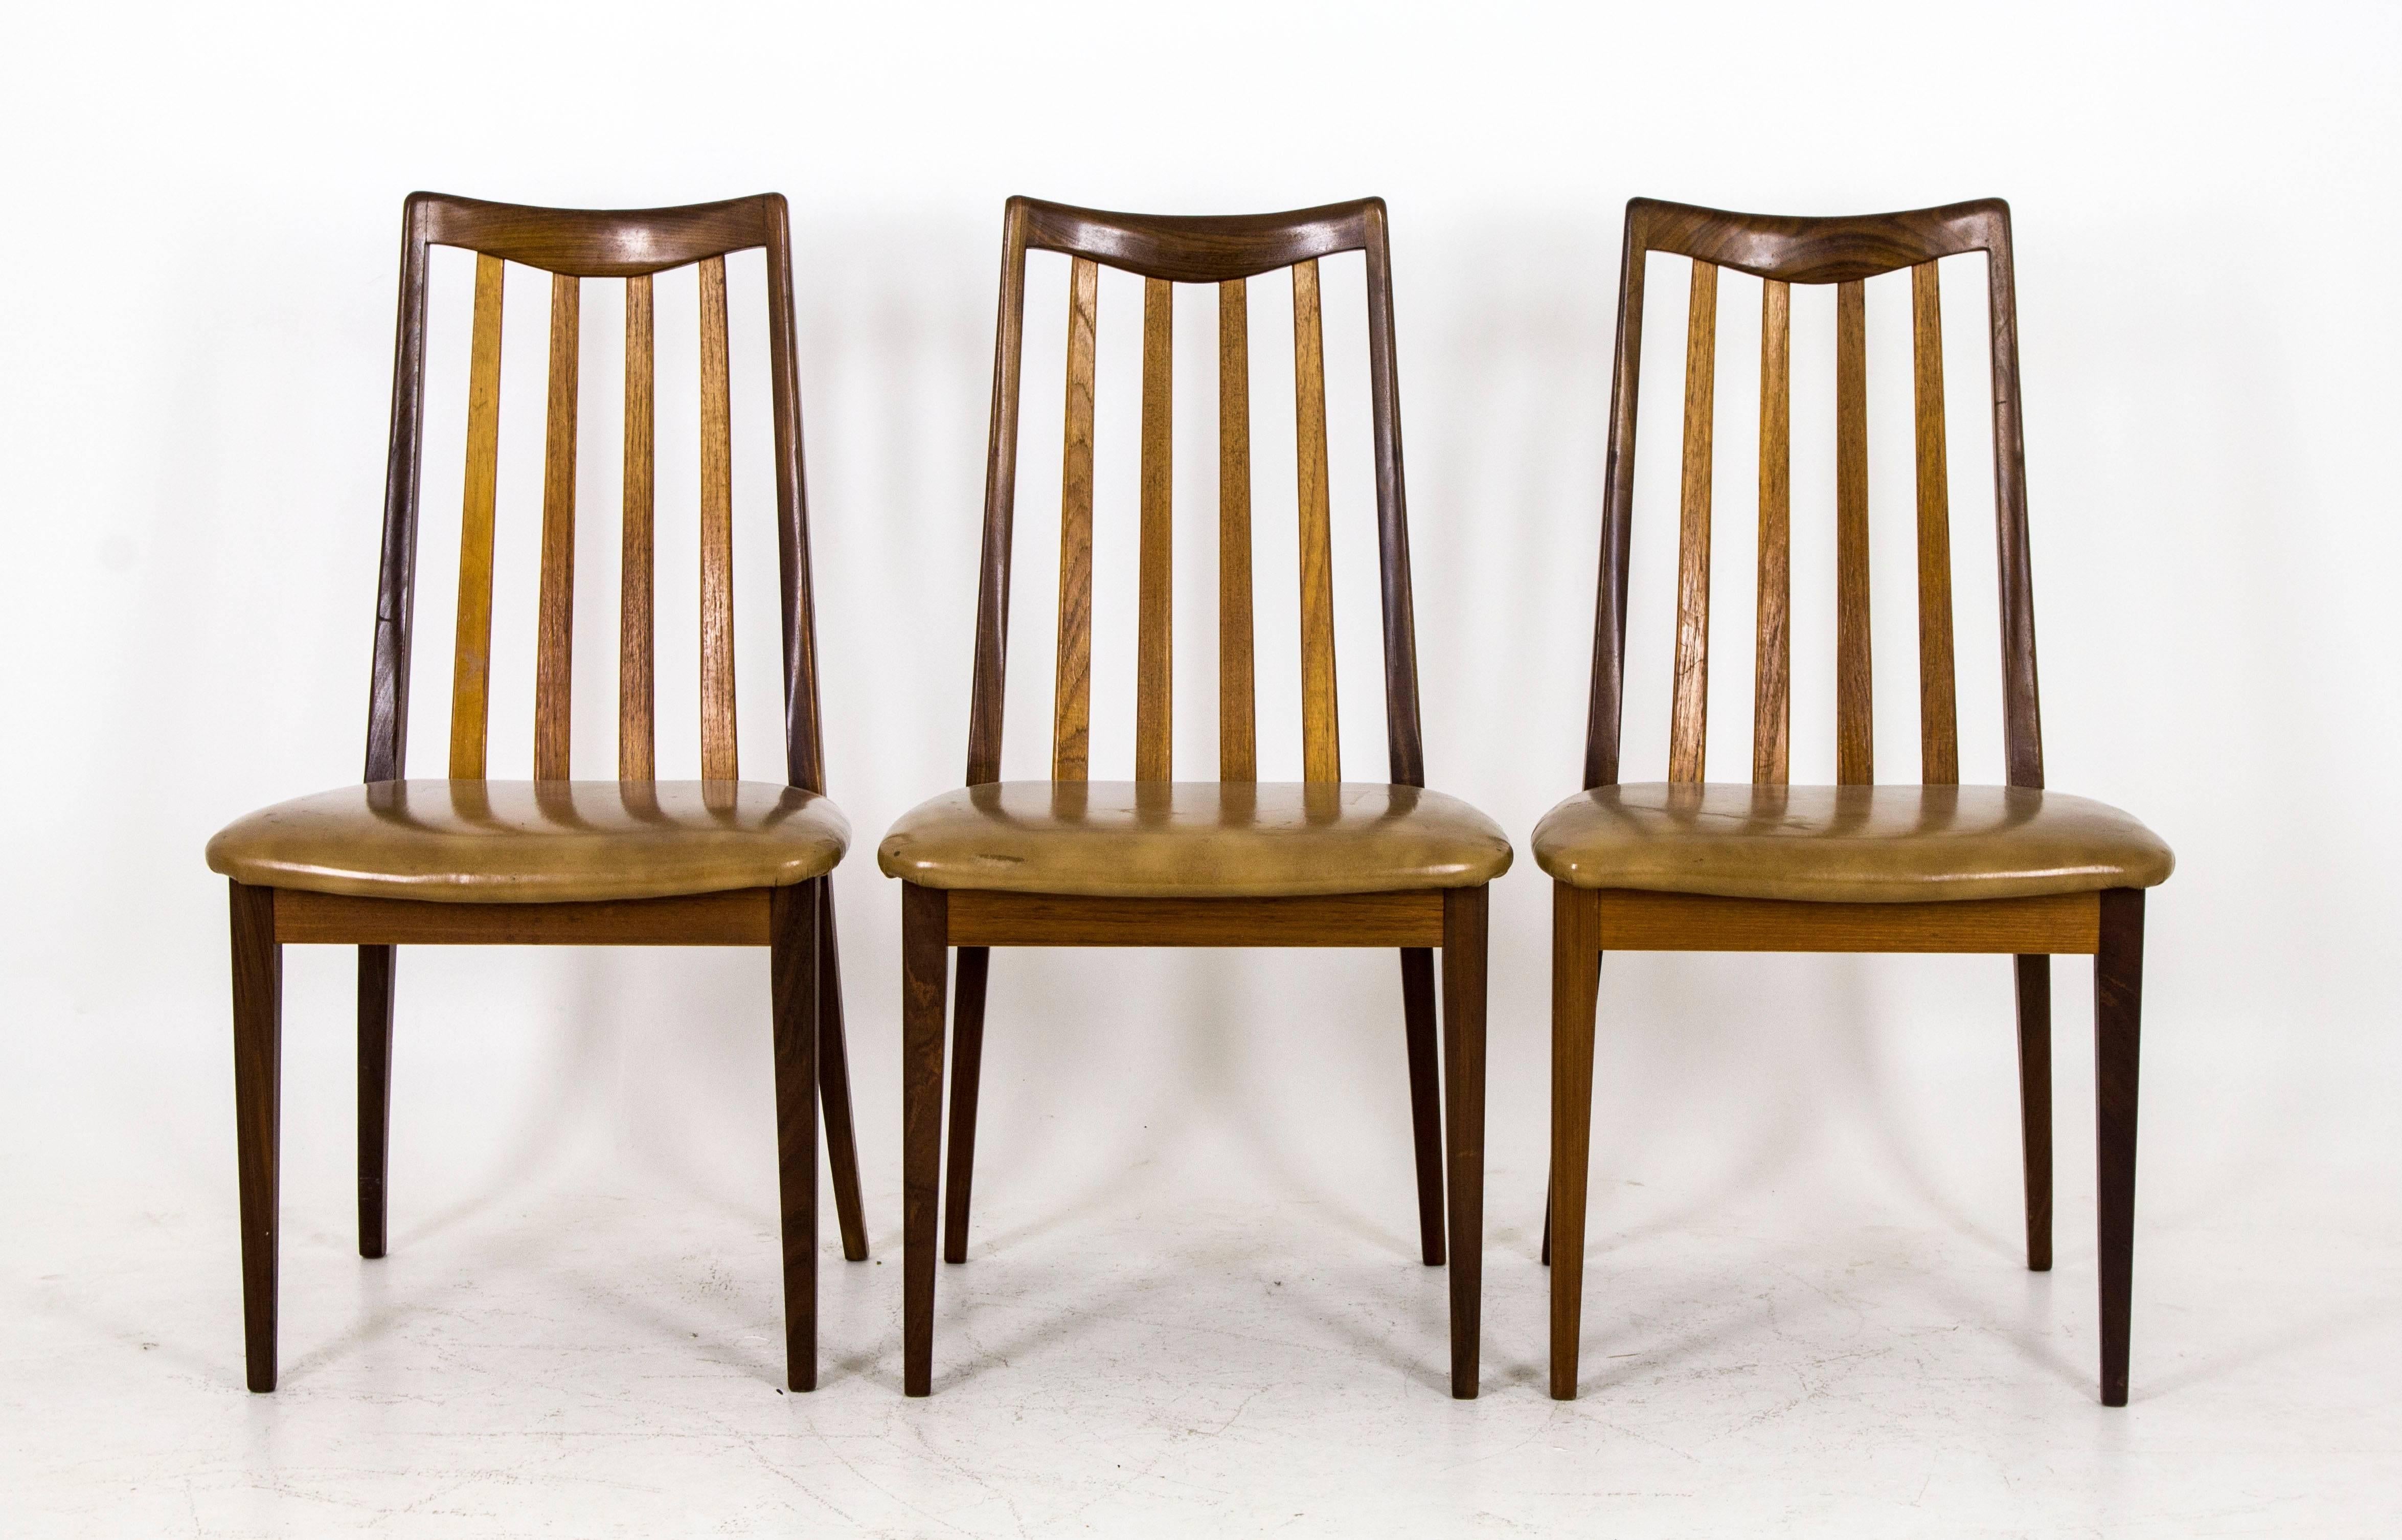 Mid-20th Century Vintage Mid-Century Modern Six Teak and Afromosia Dining Chairs by LG Dandy